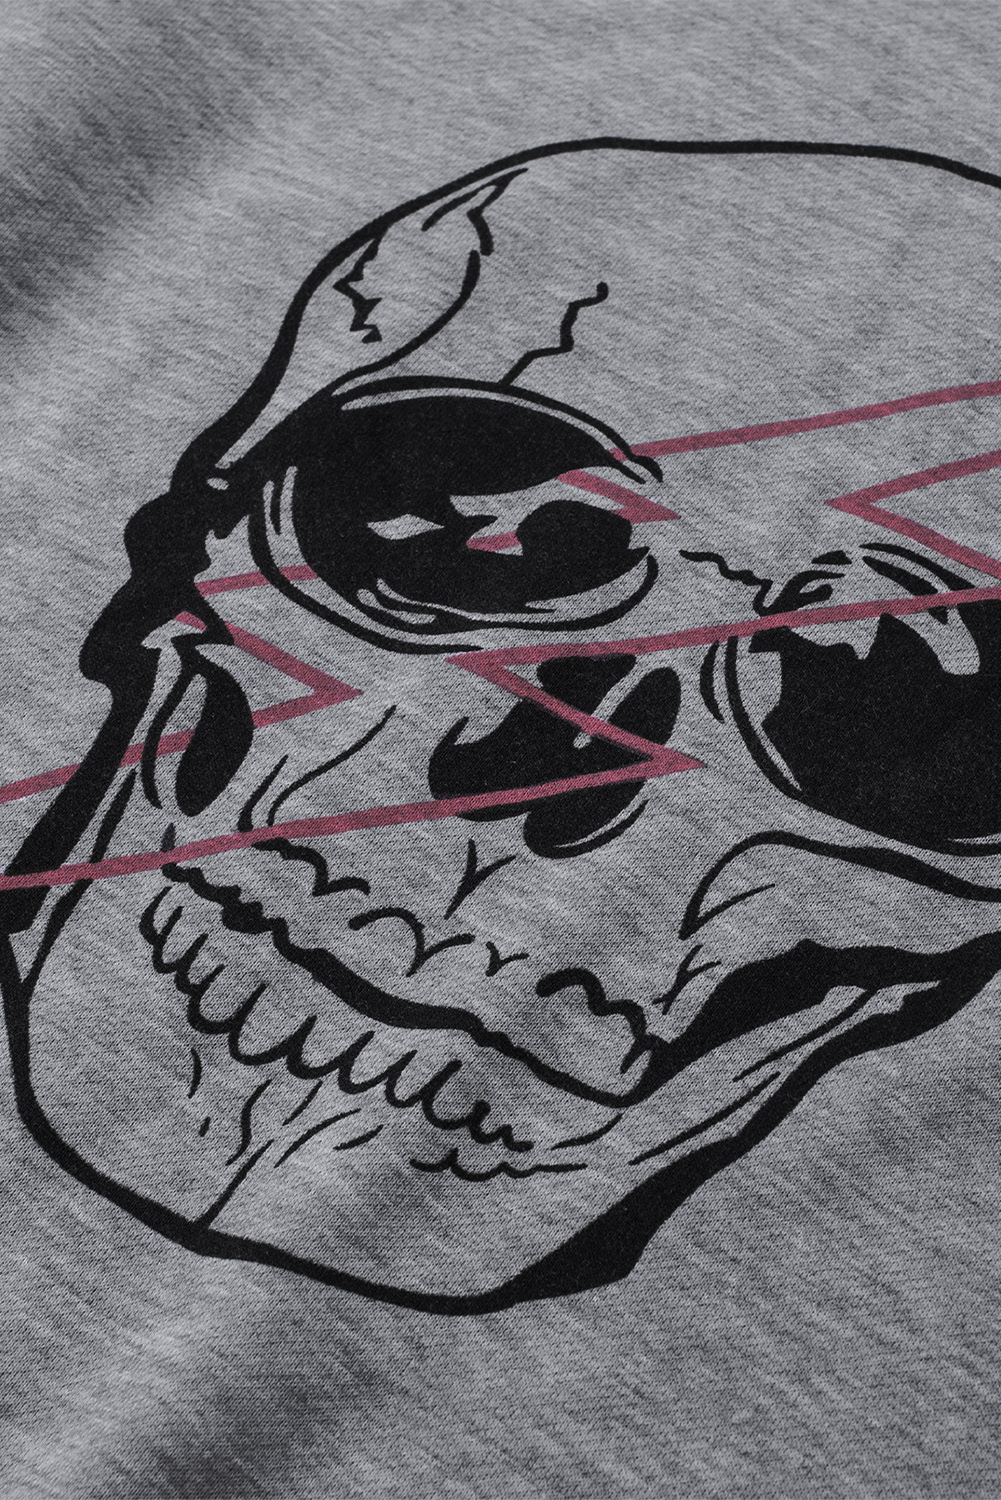 Gray Halloween Skull Graphic Sweatshirt Brought To You By Officially Sexy